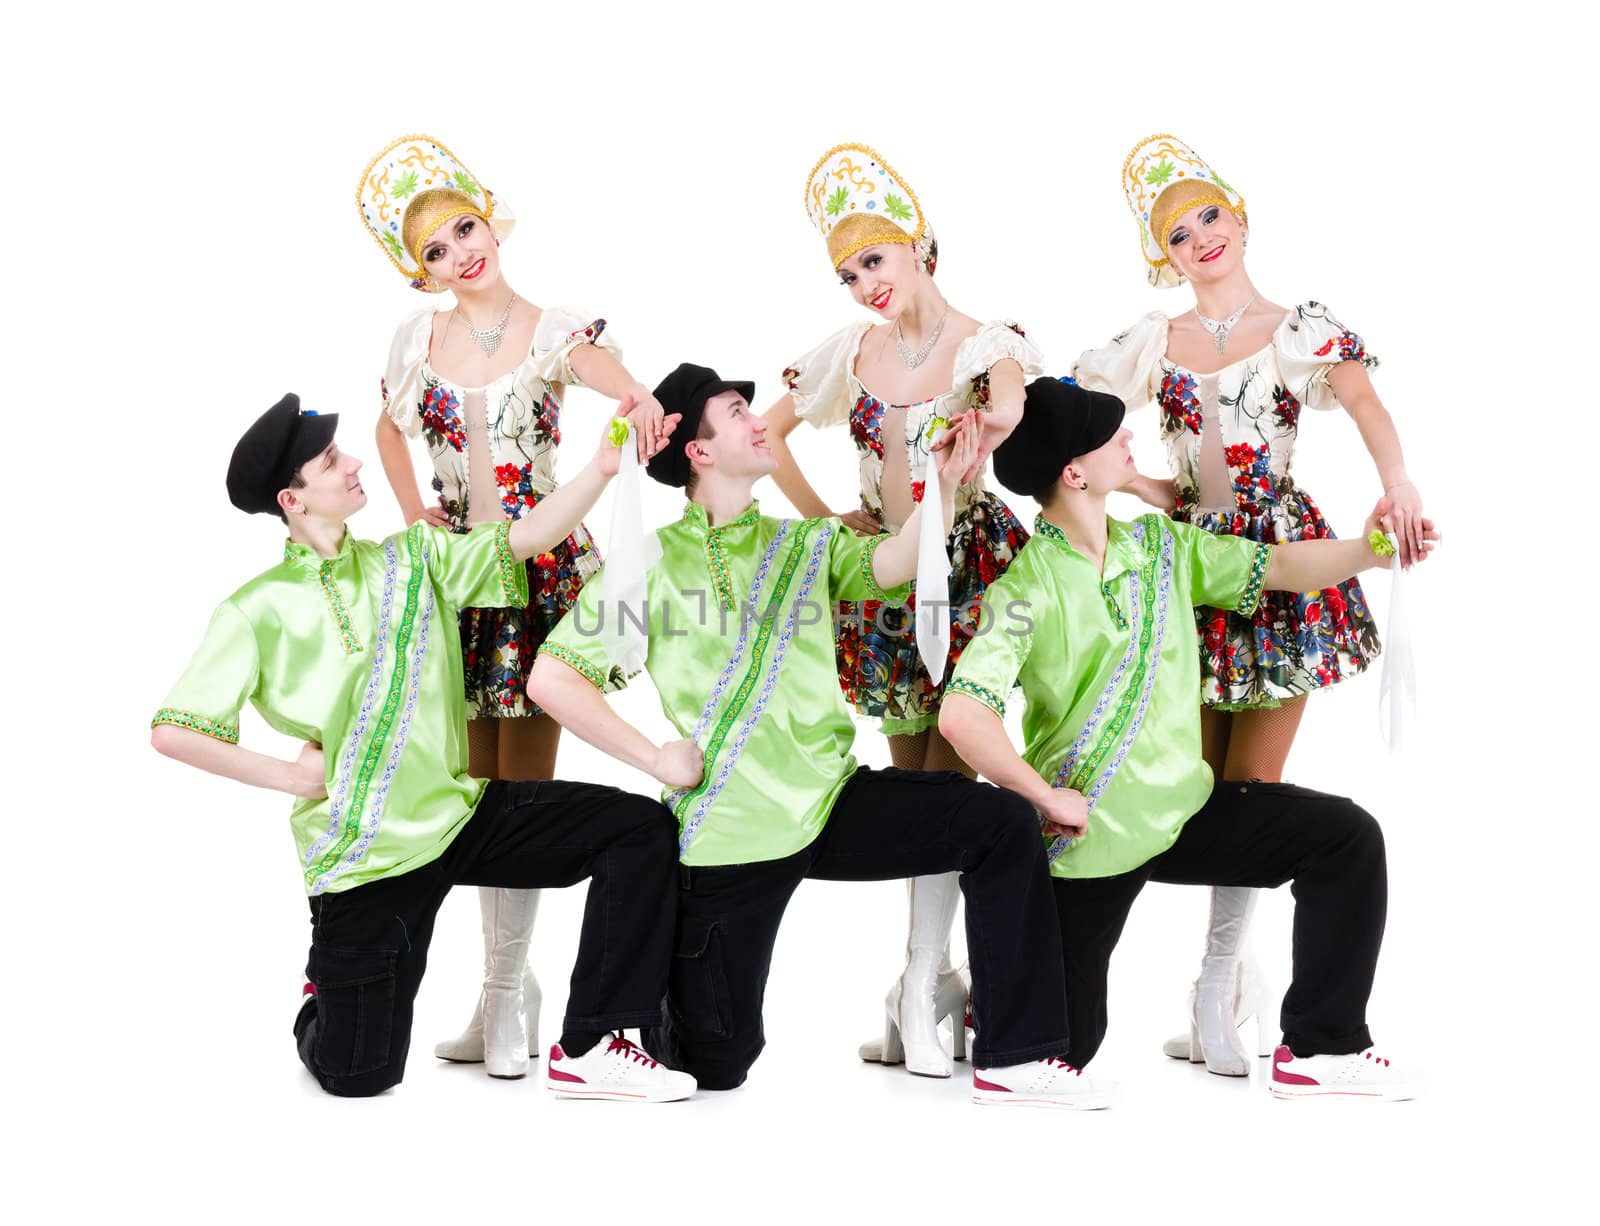 Dancer team wearing a folk ukrainian costumes dancing.  Isolated on white background in full length.